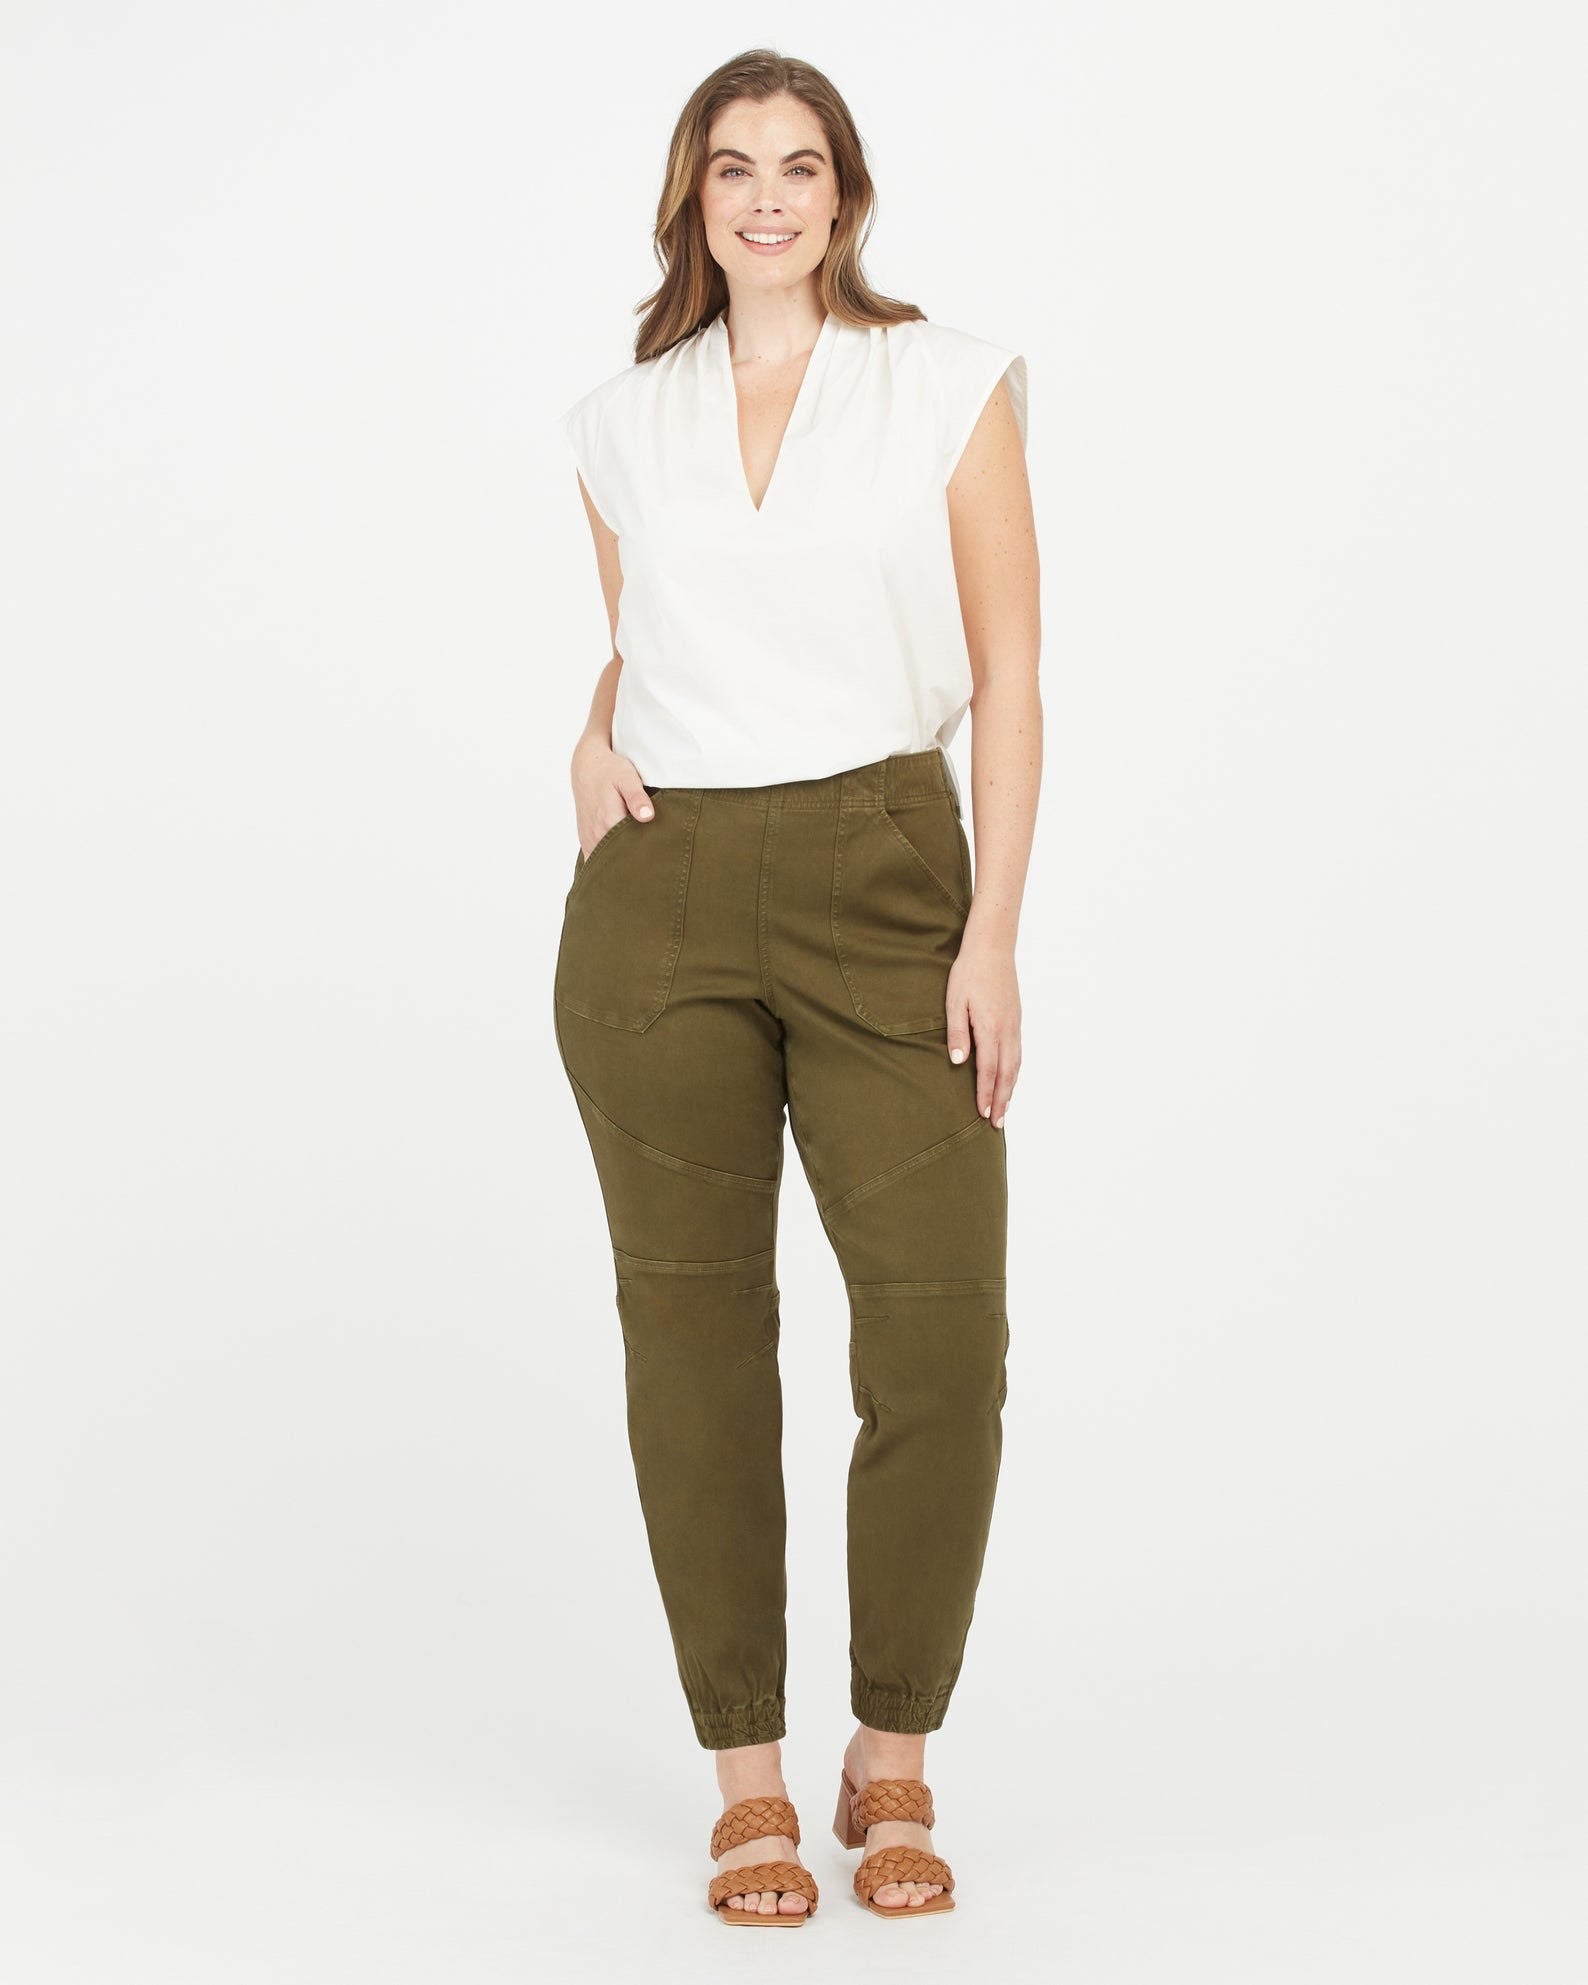 SPANX - Step into a new week in Stretch Twill! ❤️ Our Spanx Stretch Twill Cargo  Pants have a comfy fit that flatters all over. Give us a 😍 if you can't